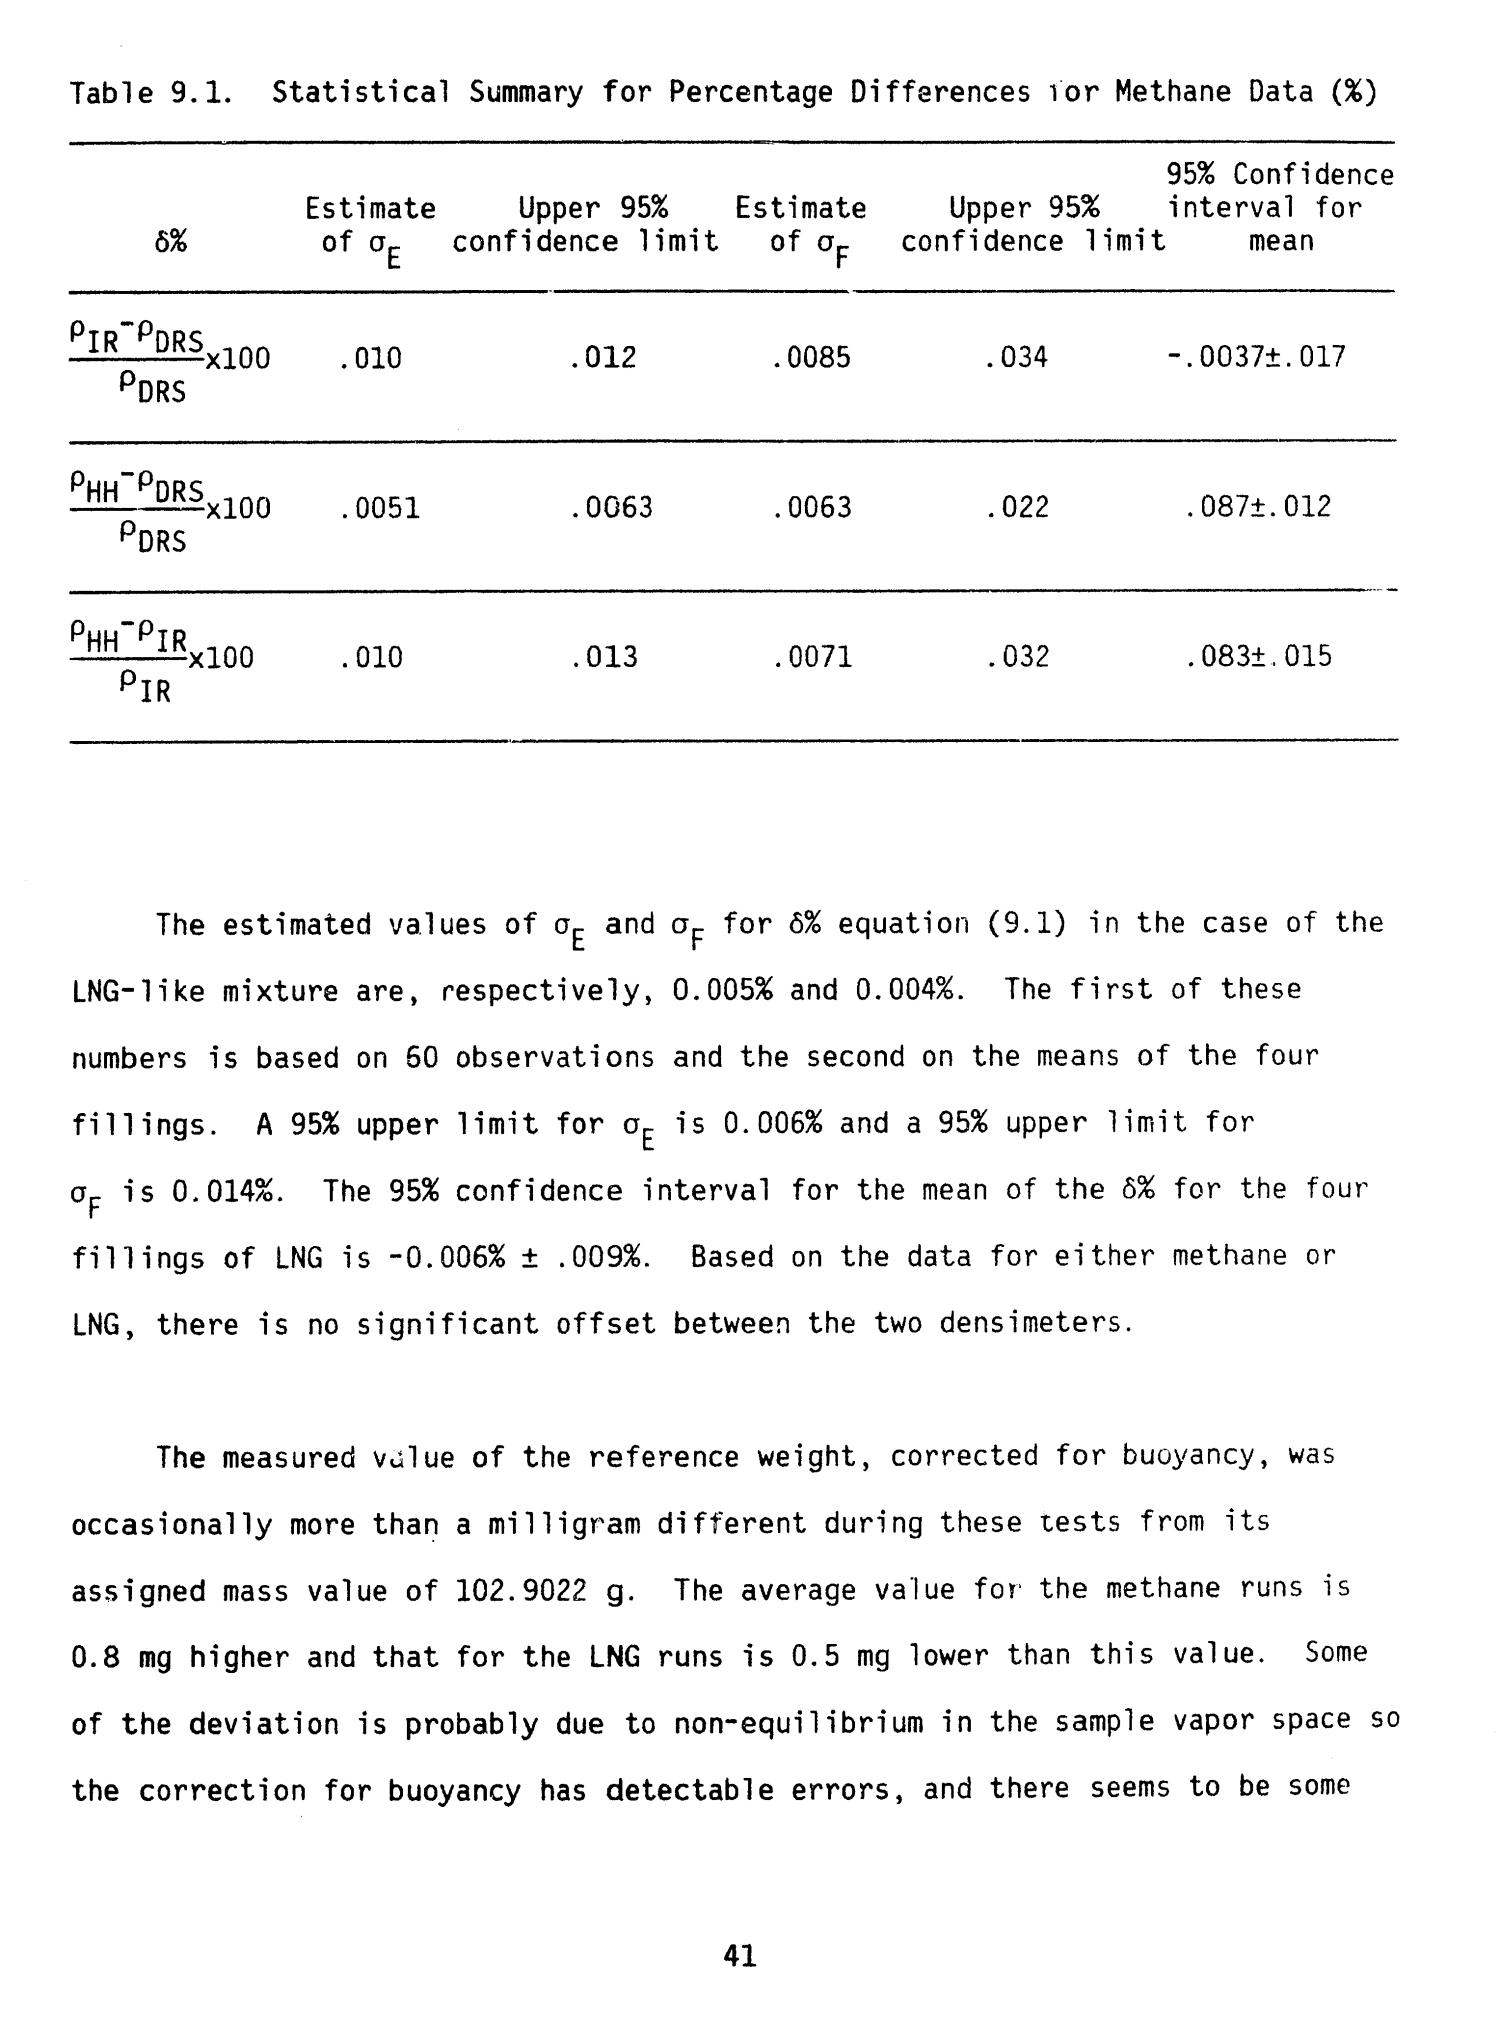 Cryogenic Fluids Density Reference System: Provisional Accuracy Statement (1980)
                                                
                                                    41
                                                